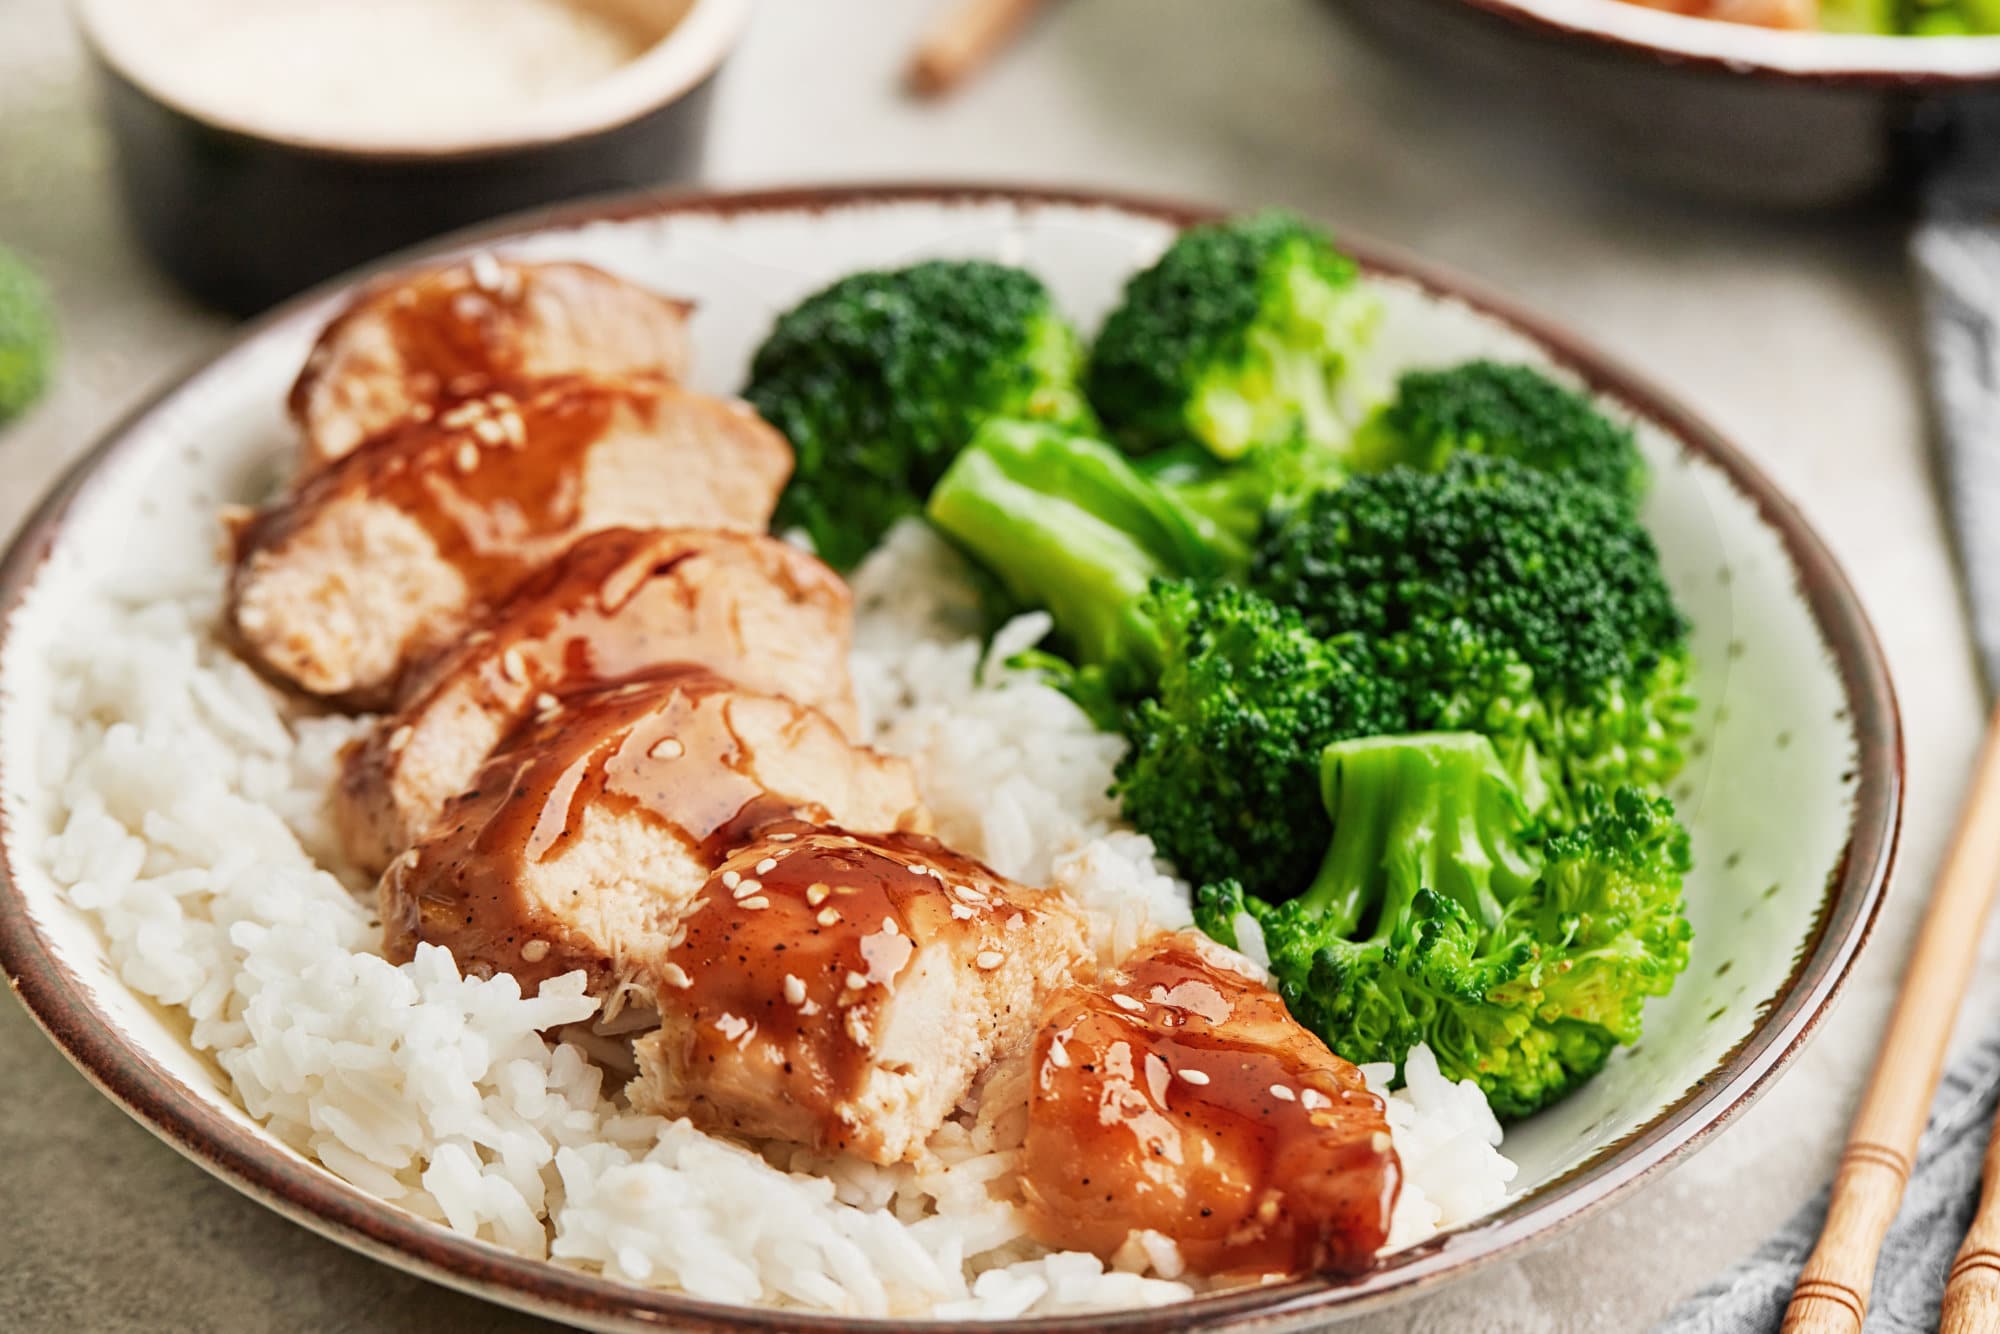 Sliced teriyaki chicken on a bed of rice, with broccoli on the side.